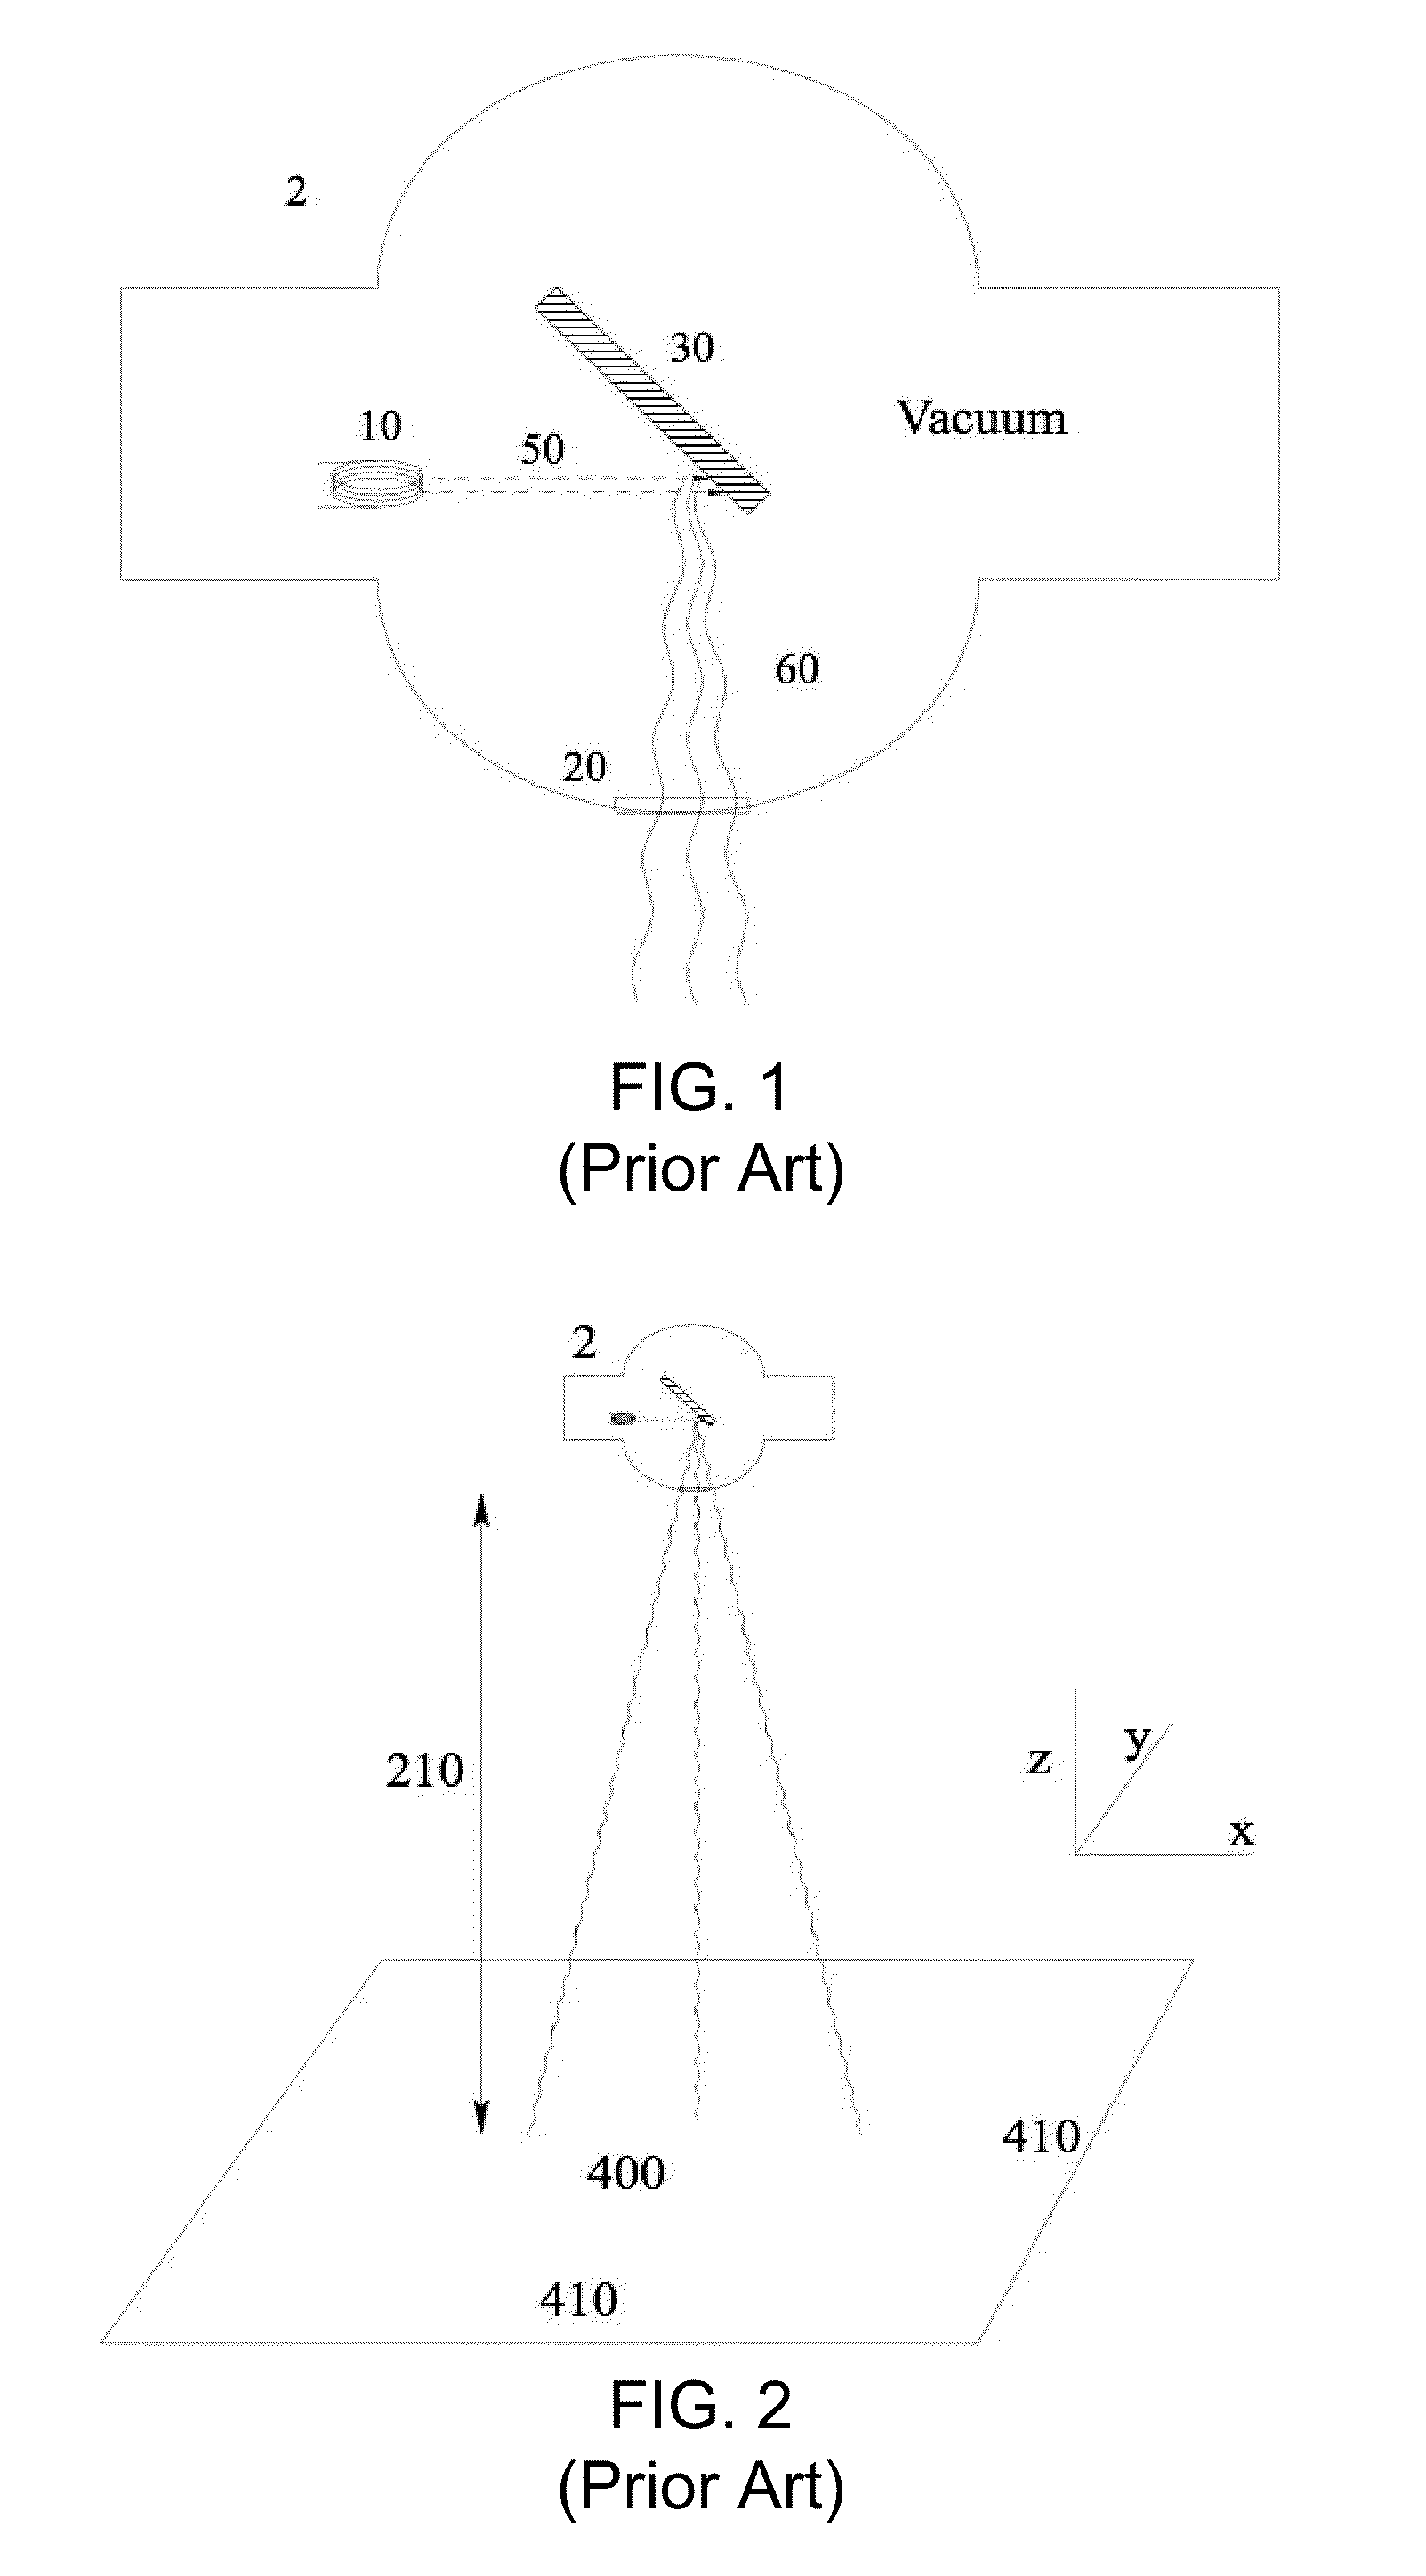 Self contained irradiation system using flat panel x-ray sources